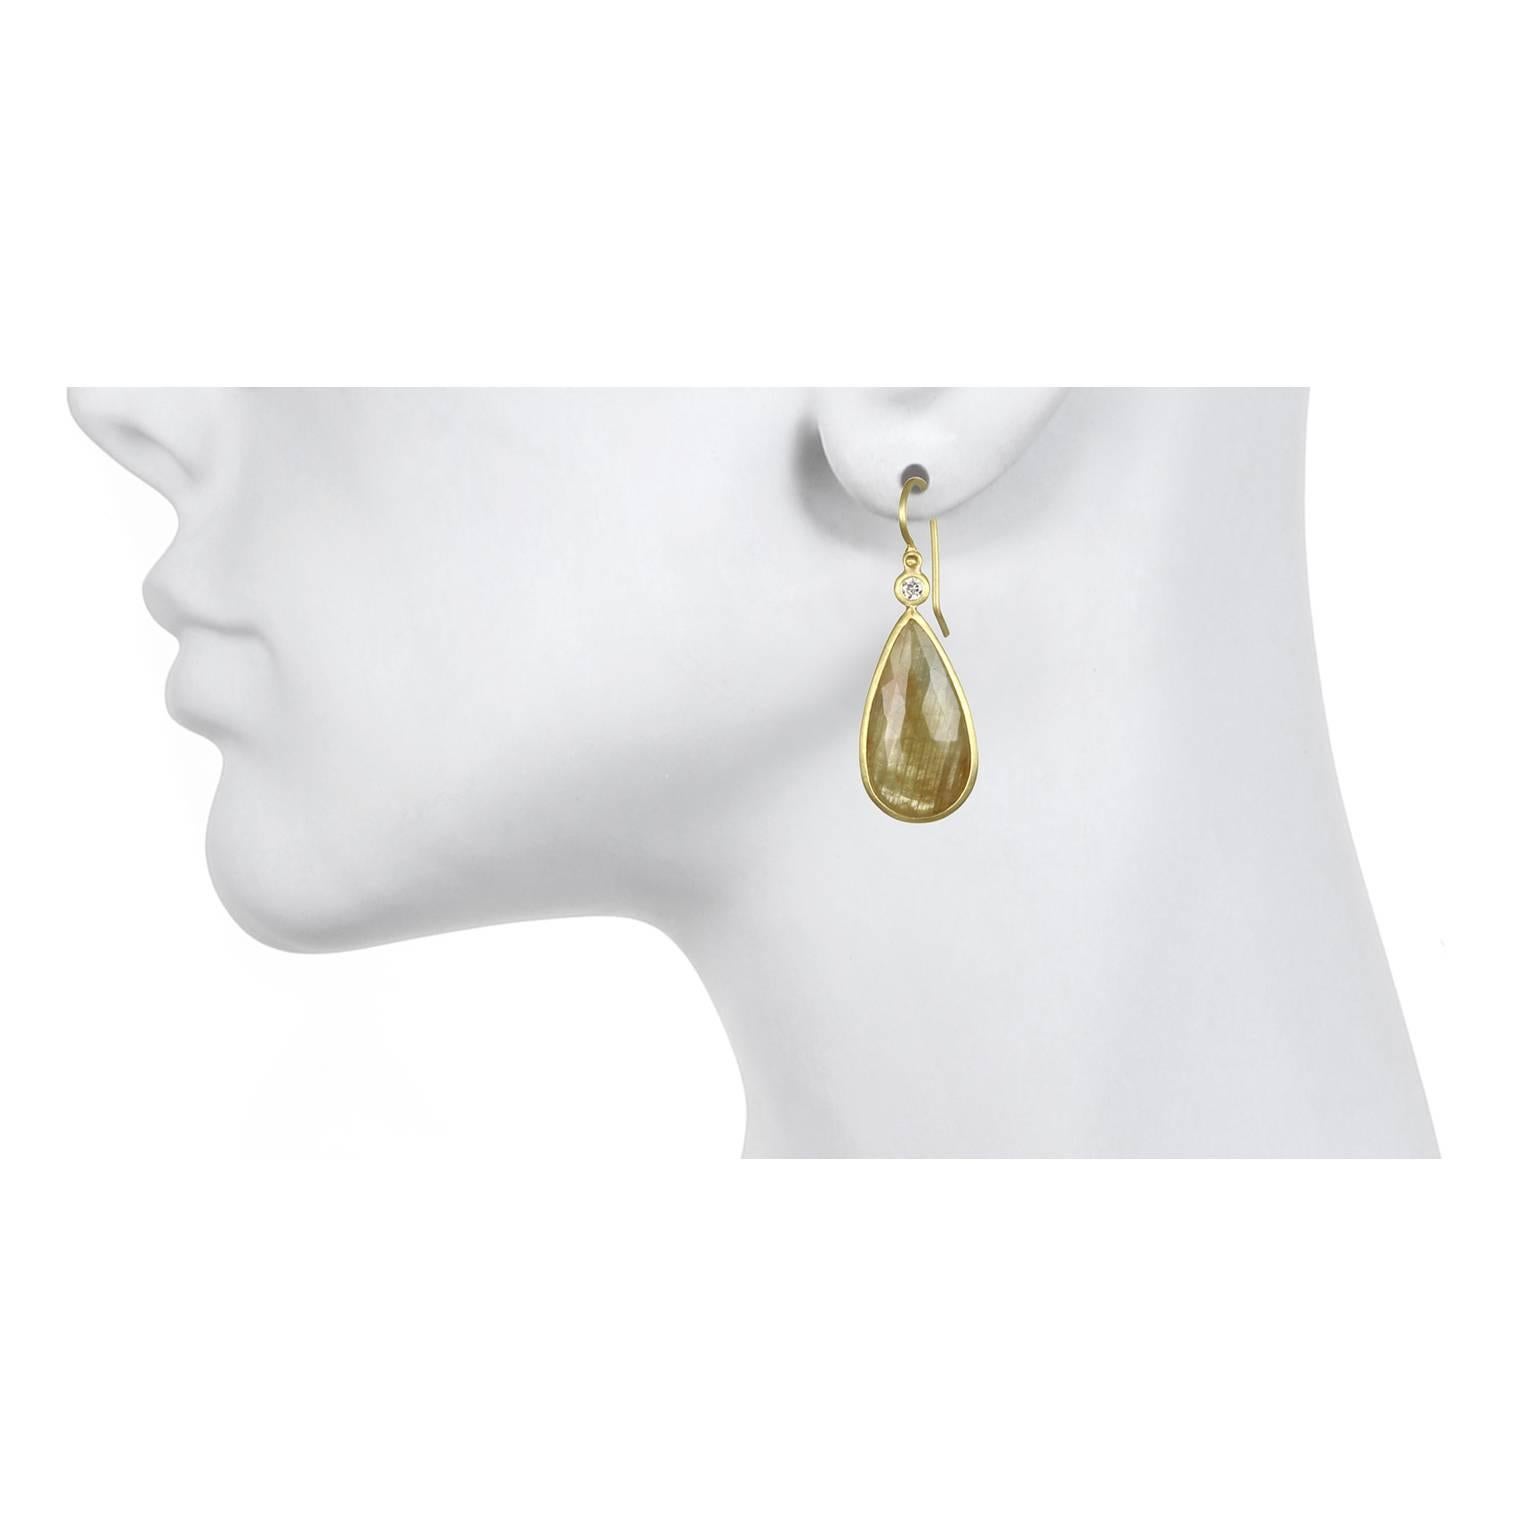 Simple, elegant and beautiful!  Handcrafted in 18k, rose cut yellow sapphire teardrop shaped slices are bezel set and paired with bezel set diamonds. The diamonds contrast and add a sparkle to the sapphire drop earrings. Understated and easy to